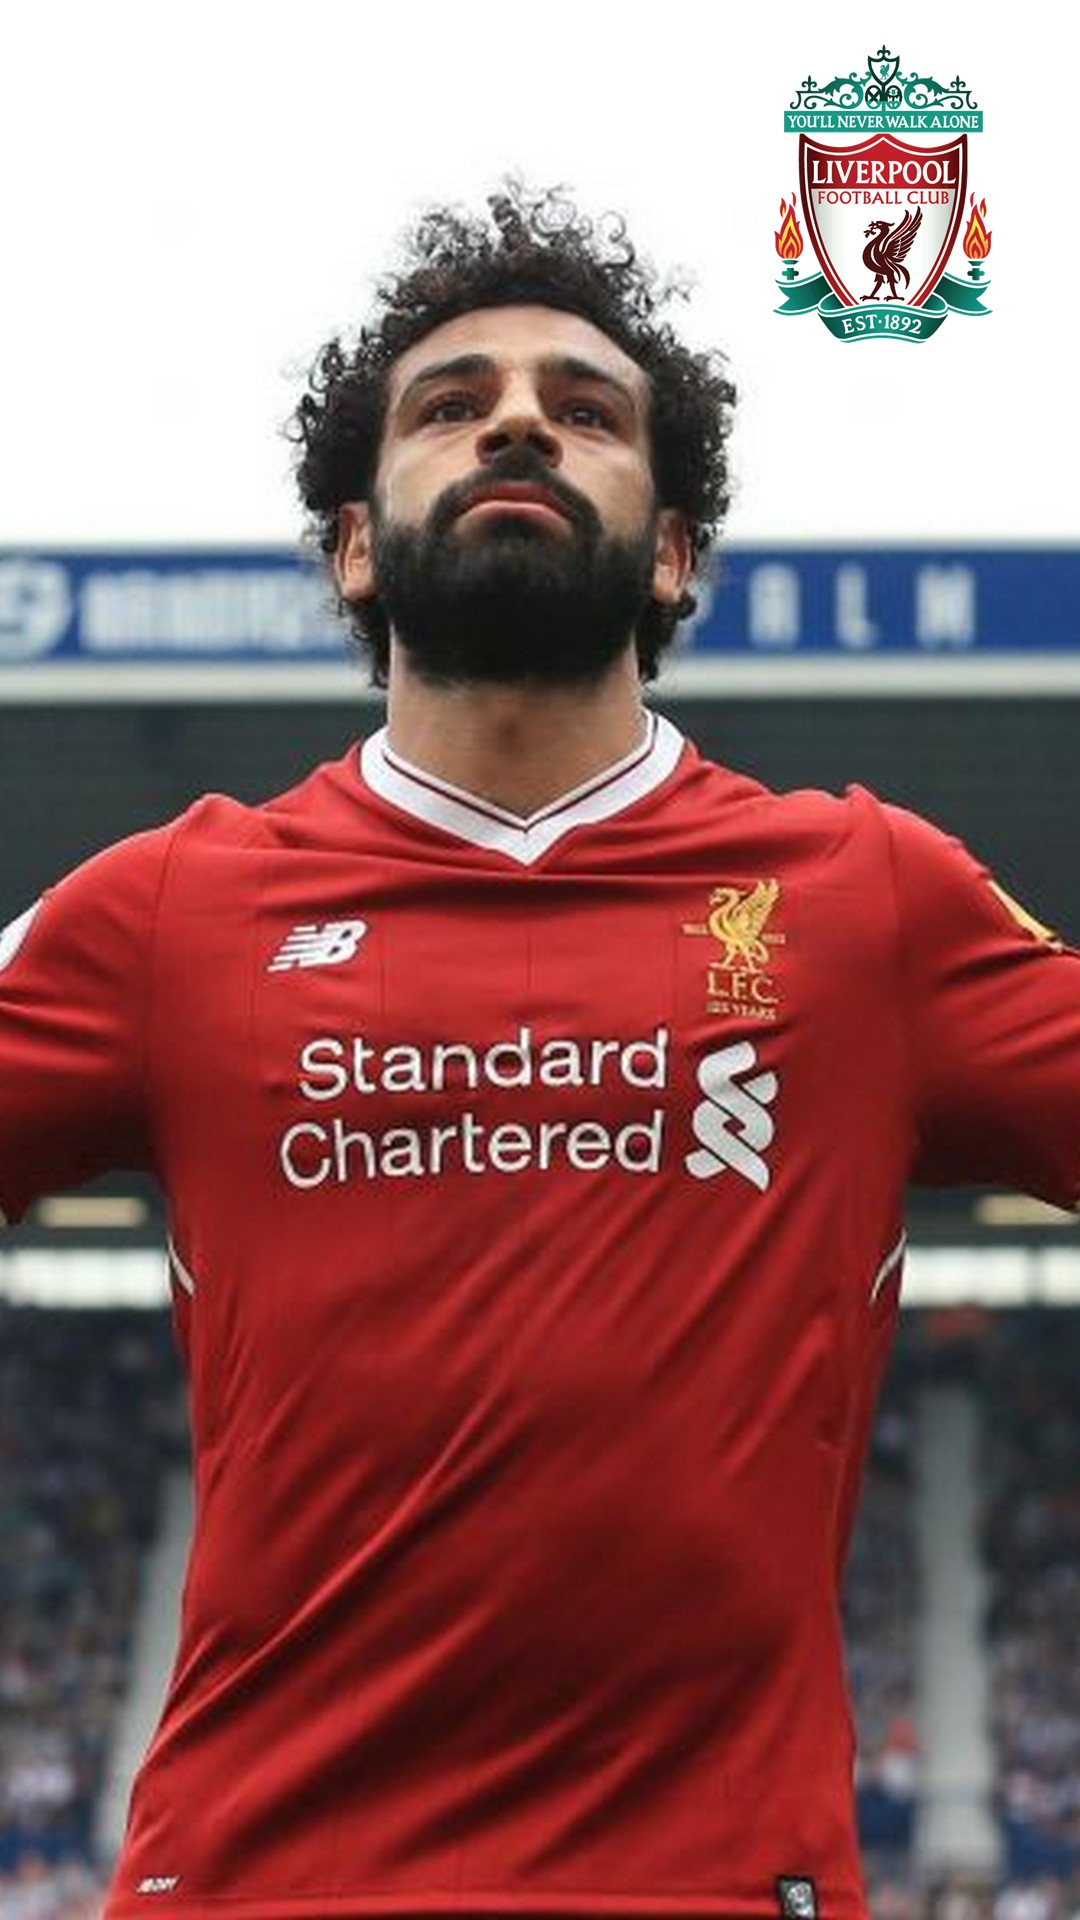 Mohamed Salah Pictures Wallpaper For iPhone with image resolution 1080x1920 pixel. You can make this wallpaper for your iPhone 5, 6, 7, 8, X backgrounds, Mobile Screensaver, or iPad Lock Screen